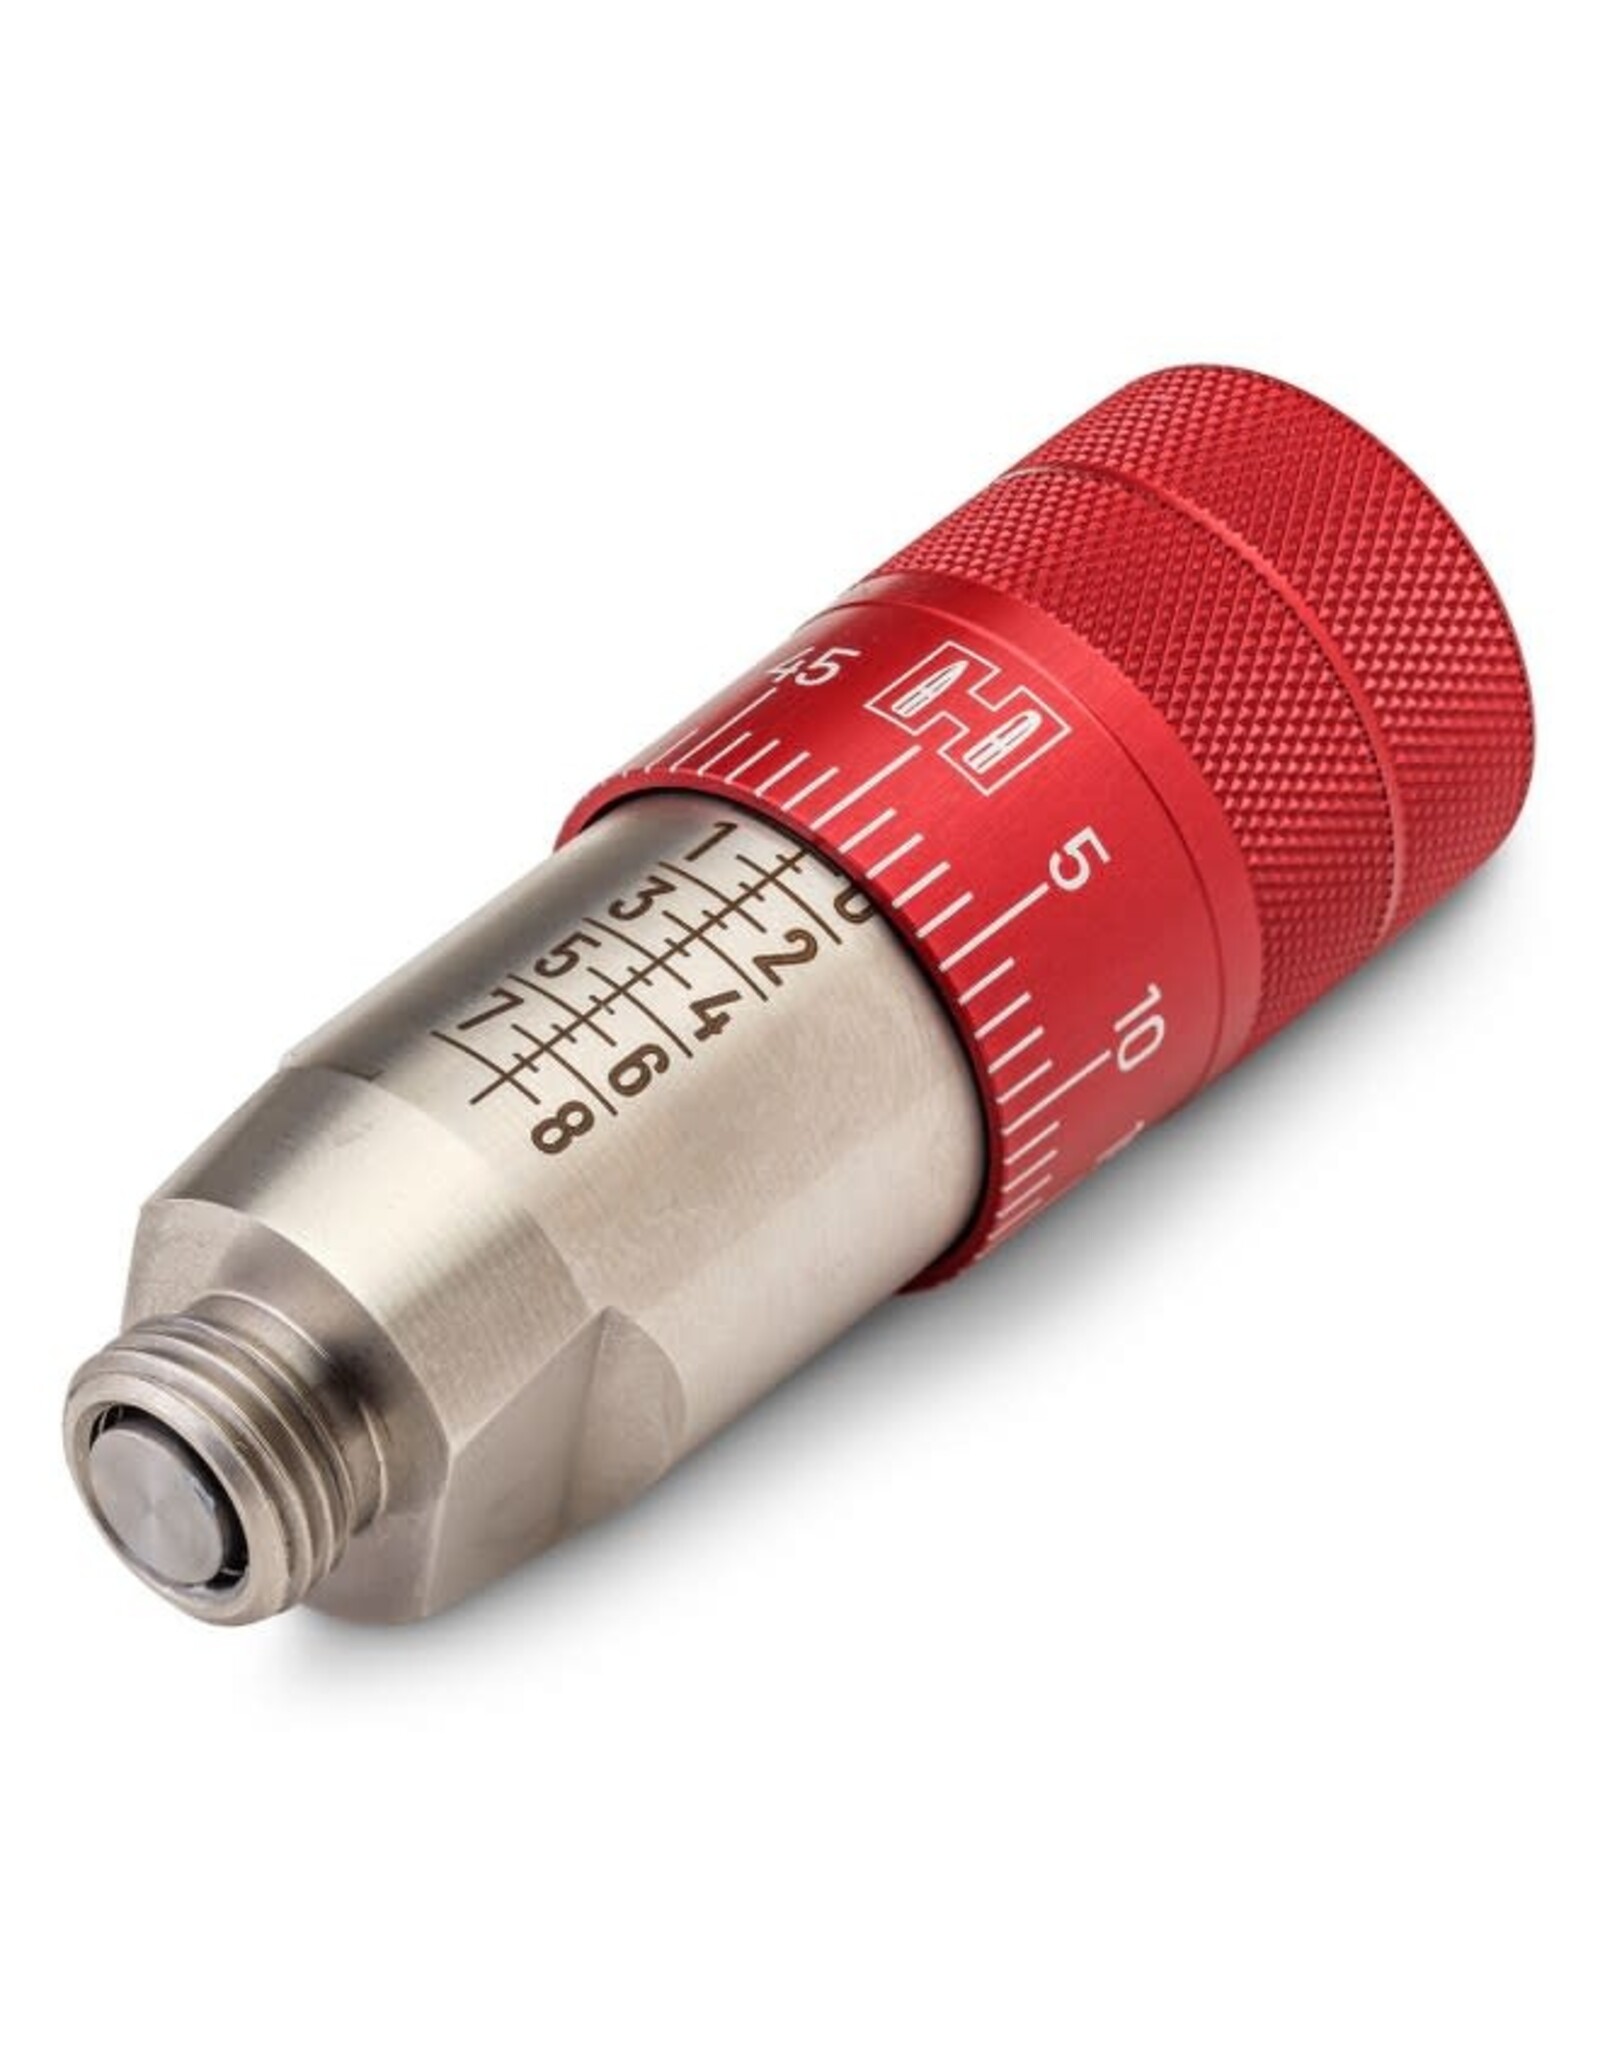 Hornady Hornady Click-Adjust Bullet Seating Micrometer